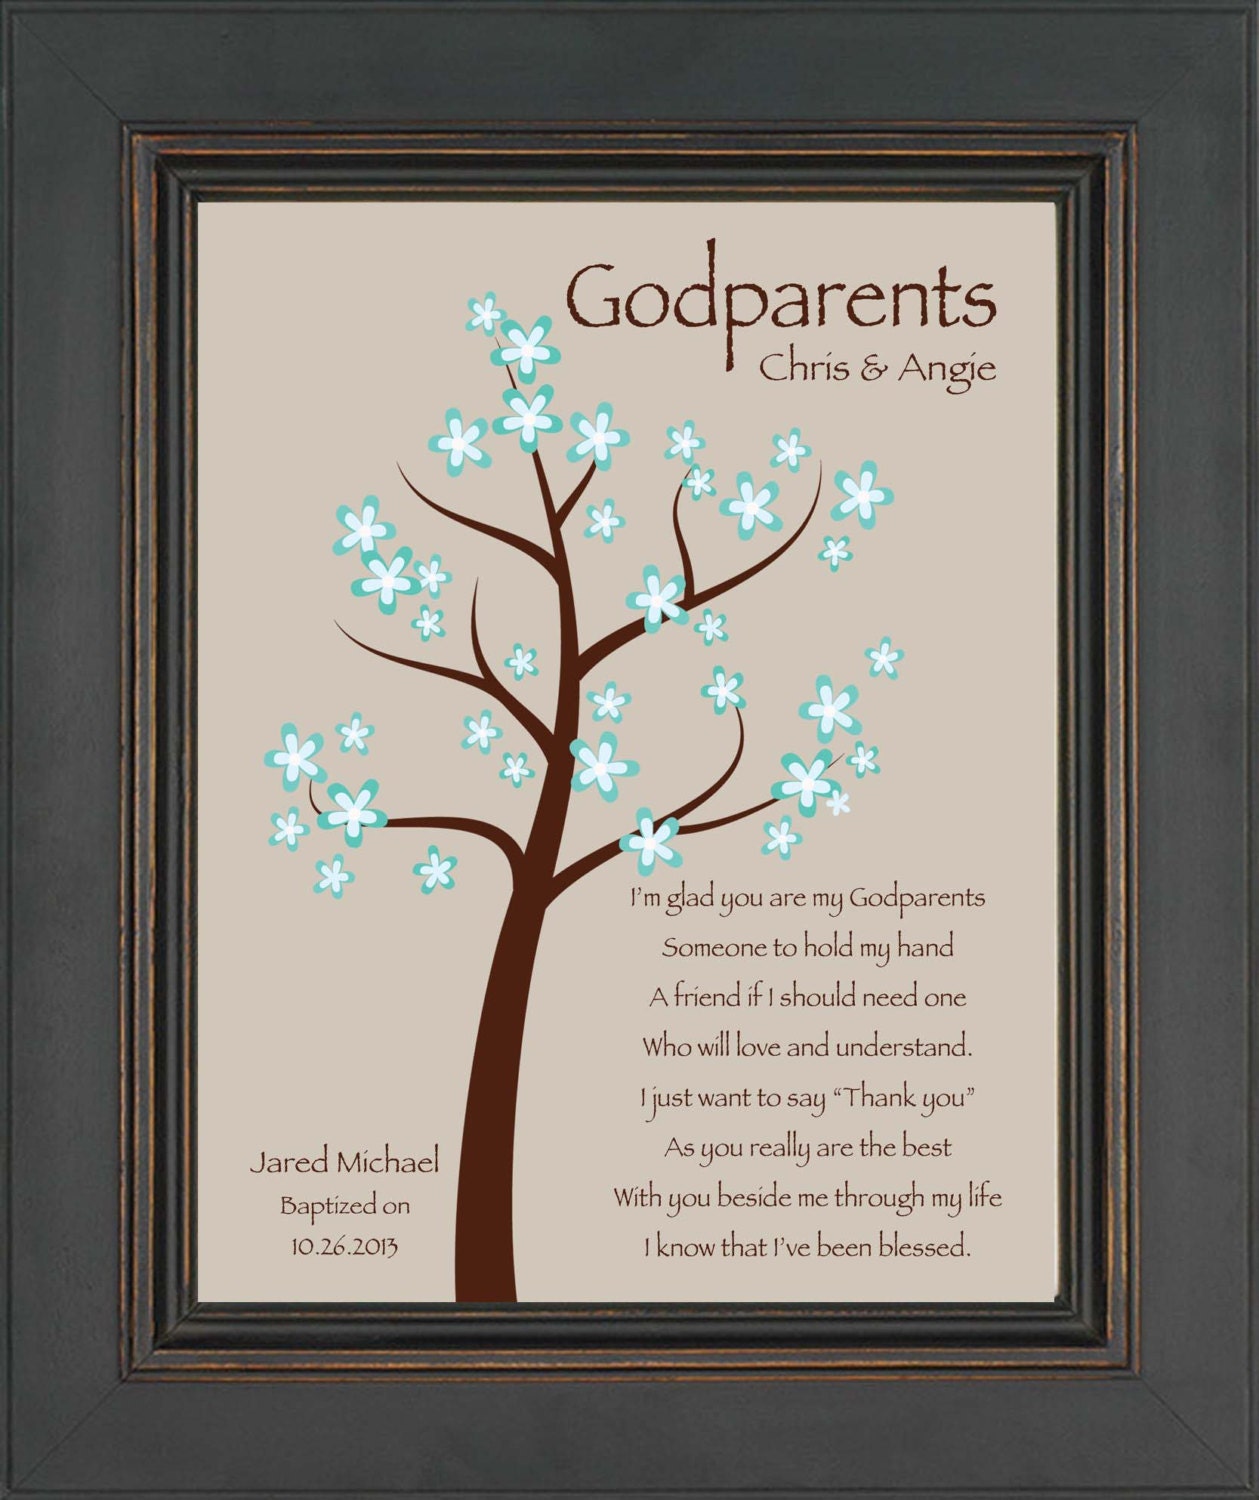 godparents-gift-8x10-print-personalized-gift-for-godmother